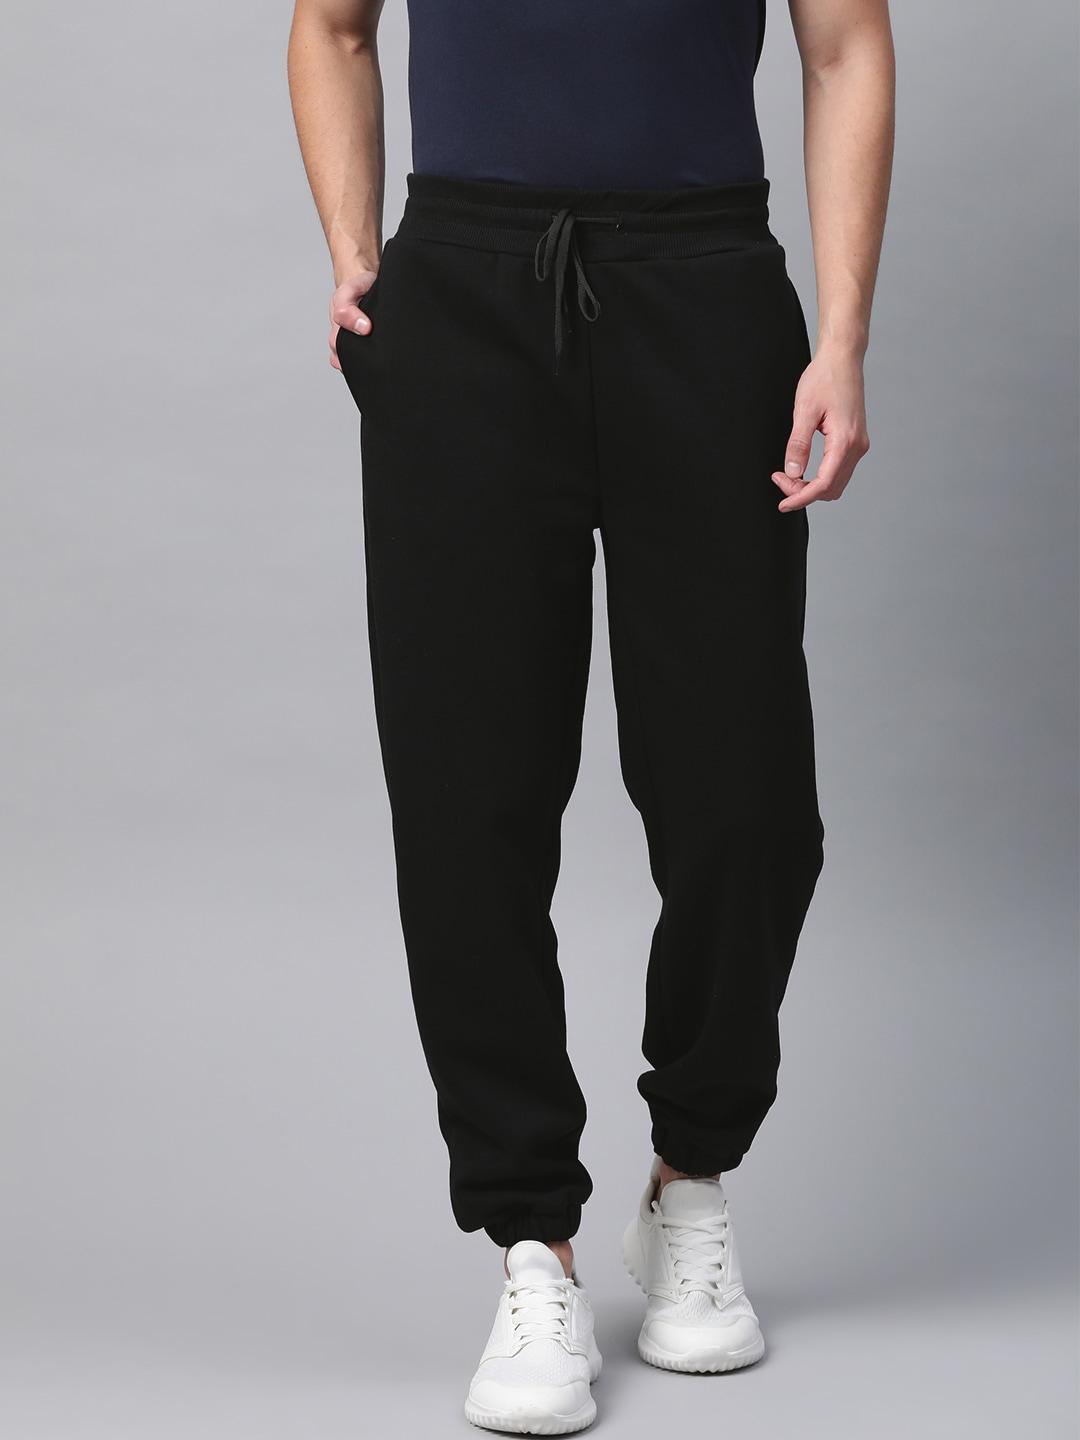 fitkin-men-black-solid-winter-joggers